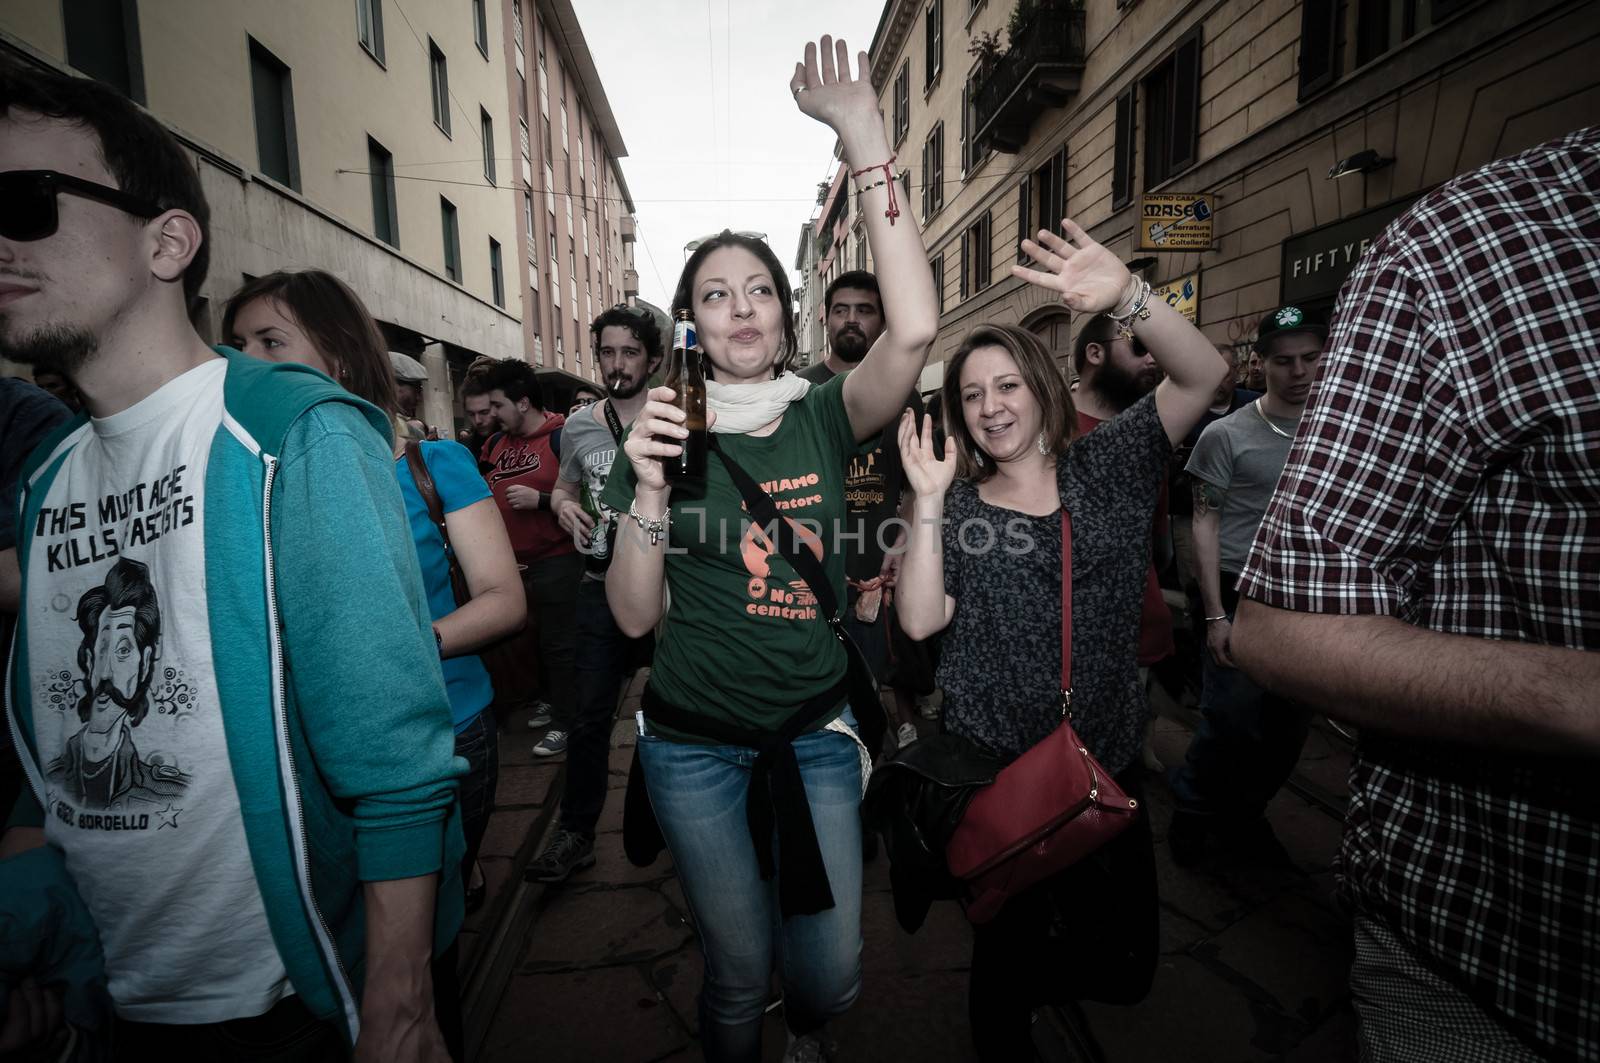 Labor day celebration in Milan May 1, 2013 by peus